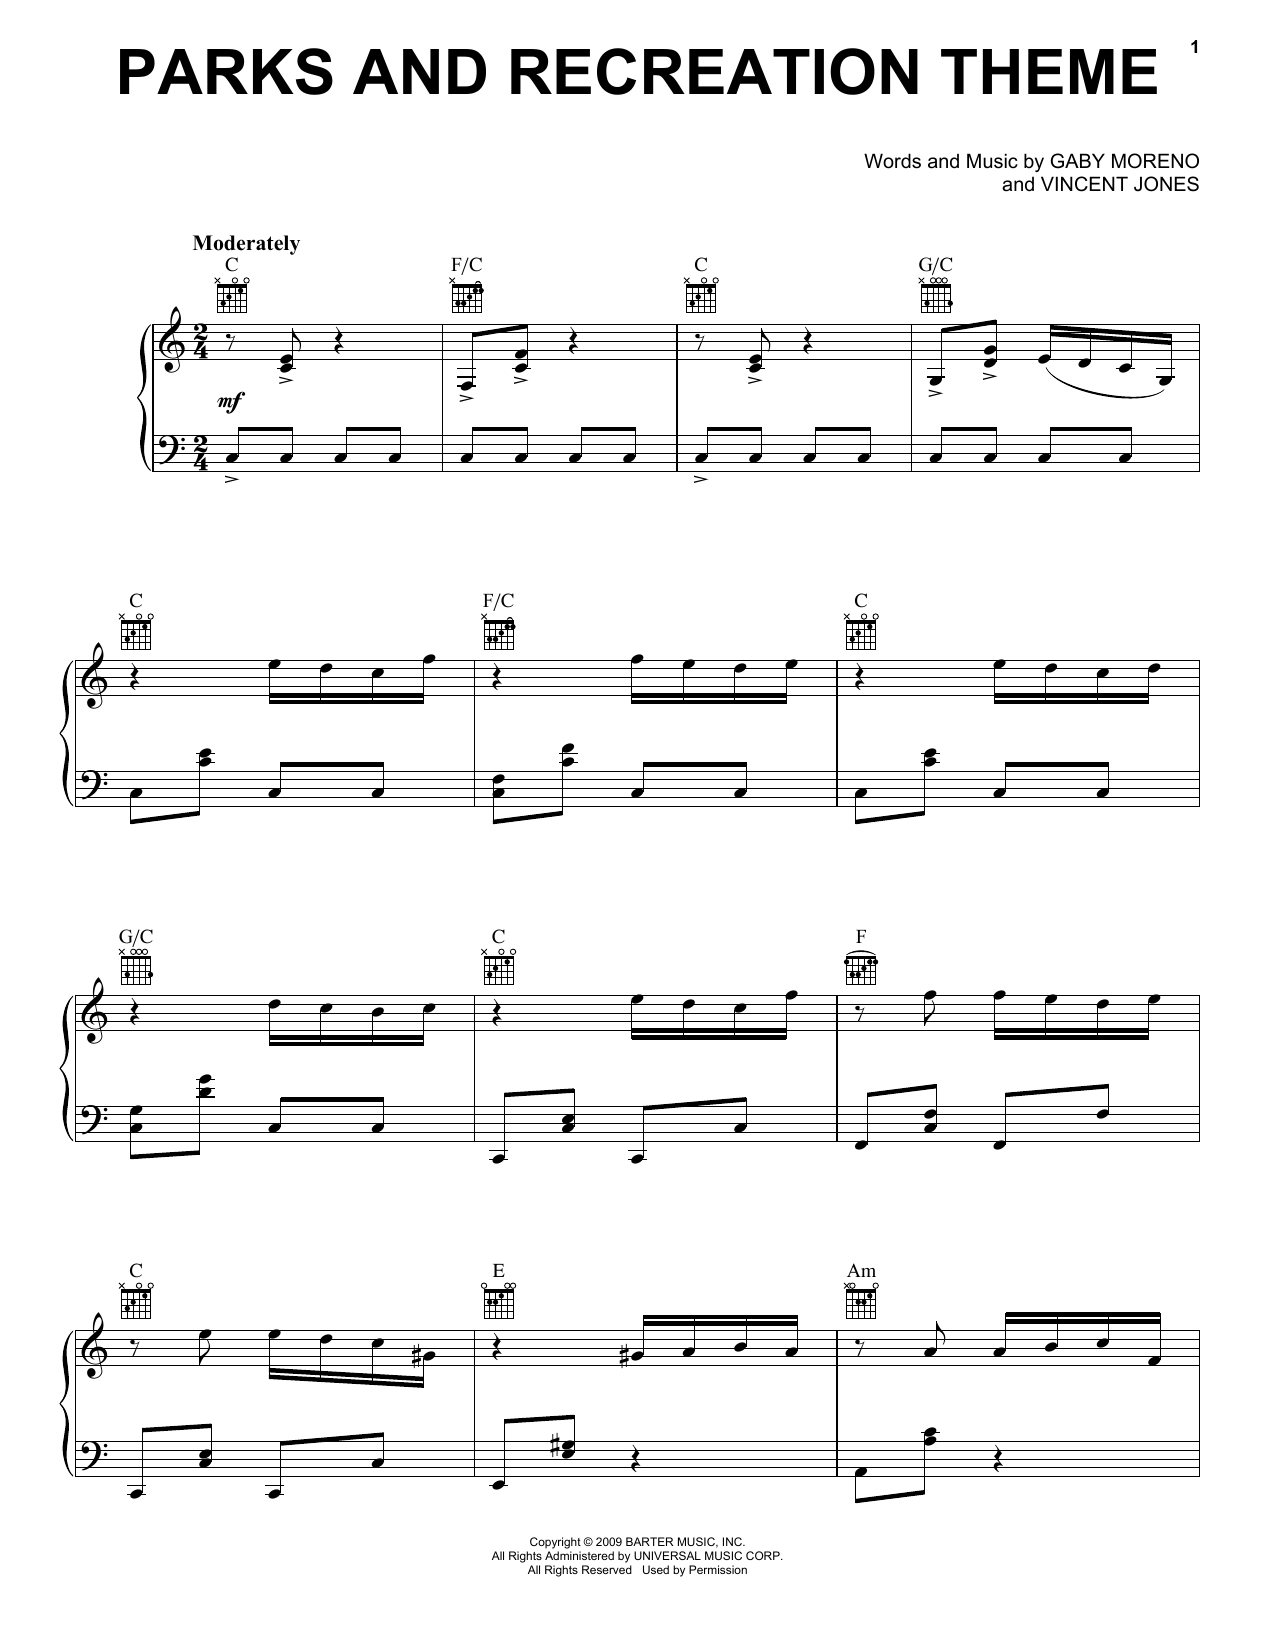 Download Gaby Moreno and Vincent Jones Parks And Recreation Theme Sheet Music